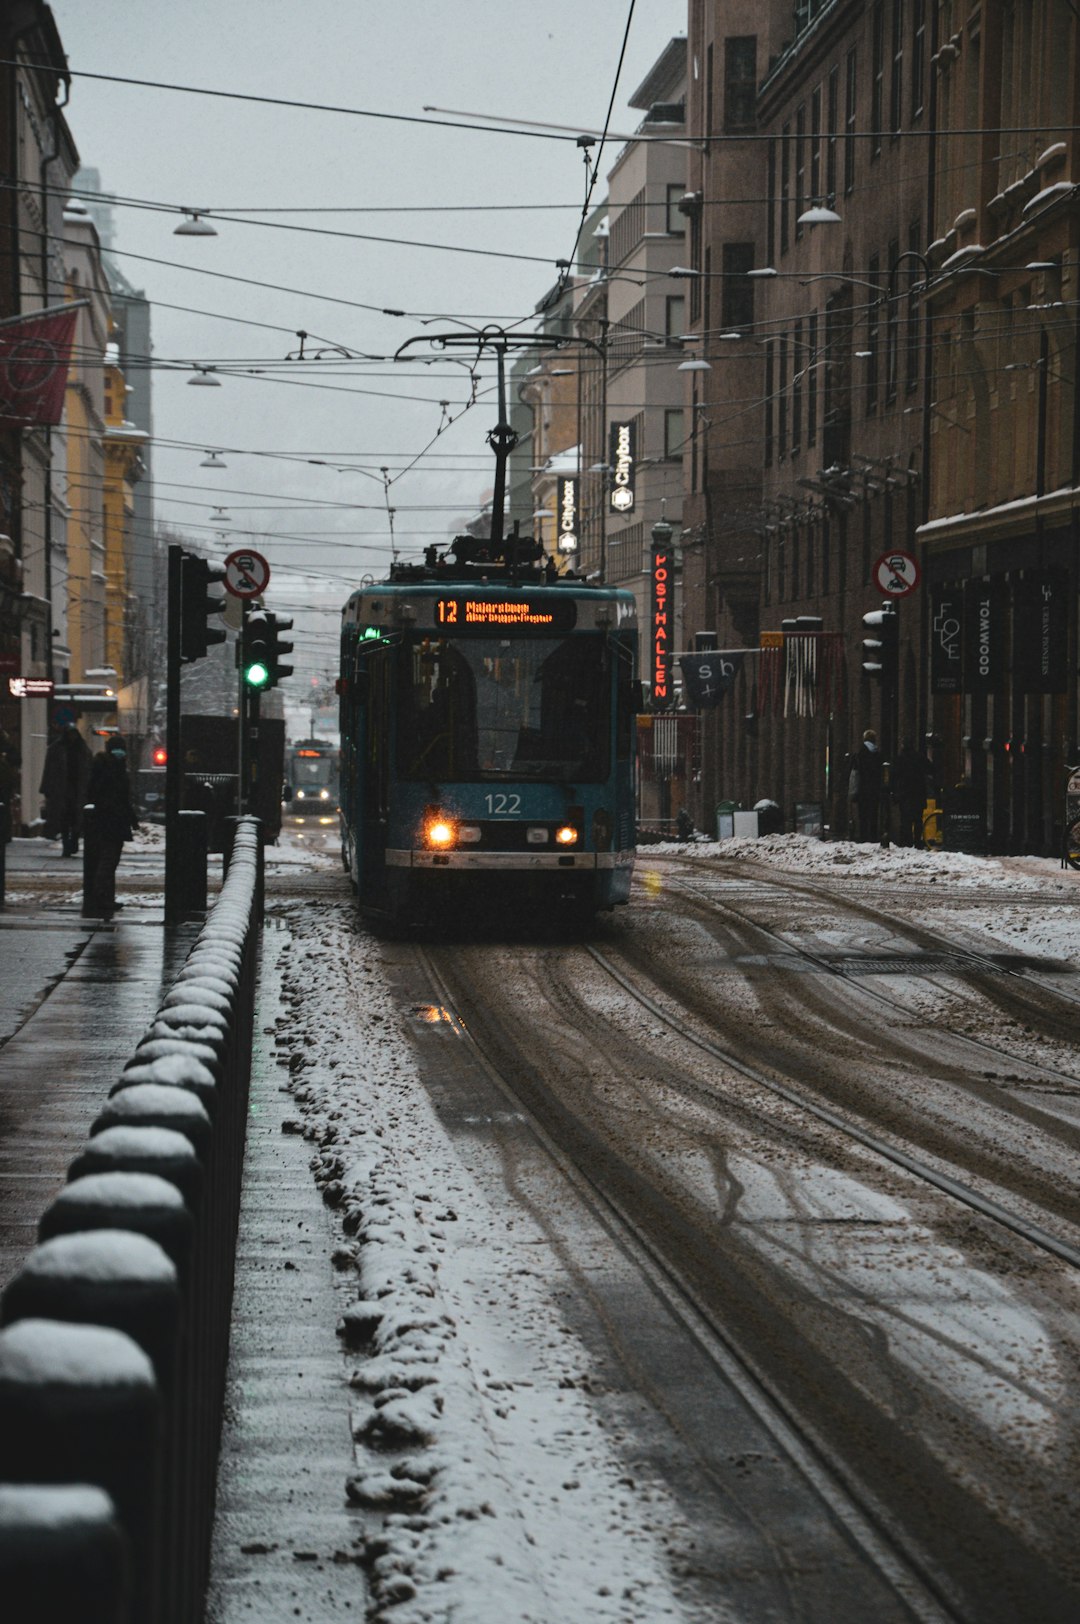 white and black tram on road during daytime